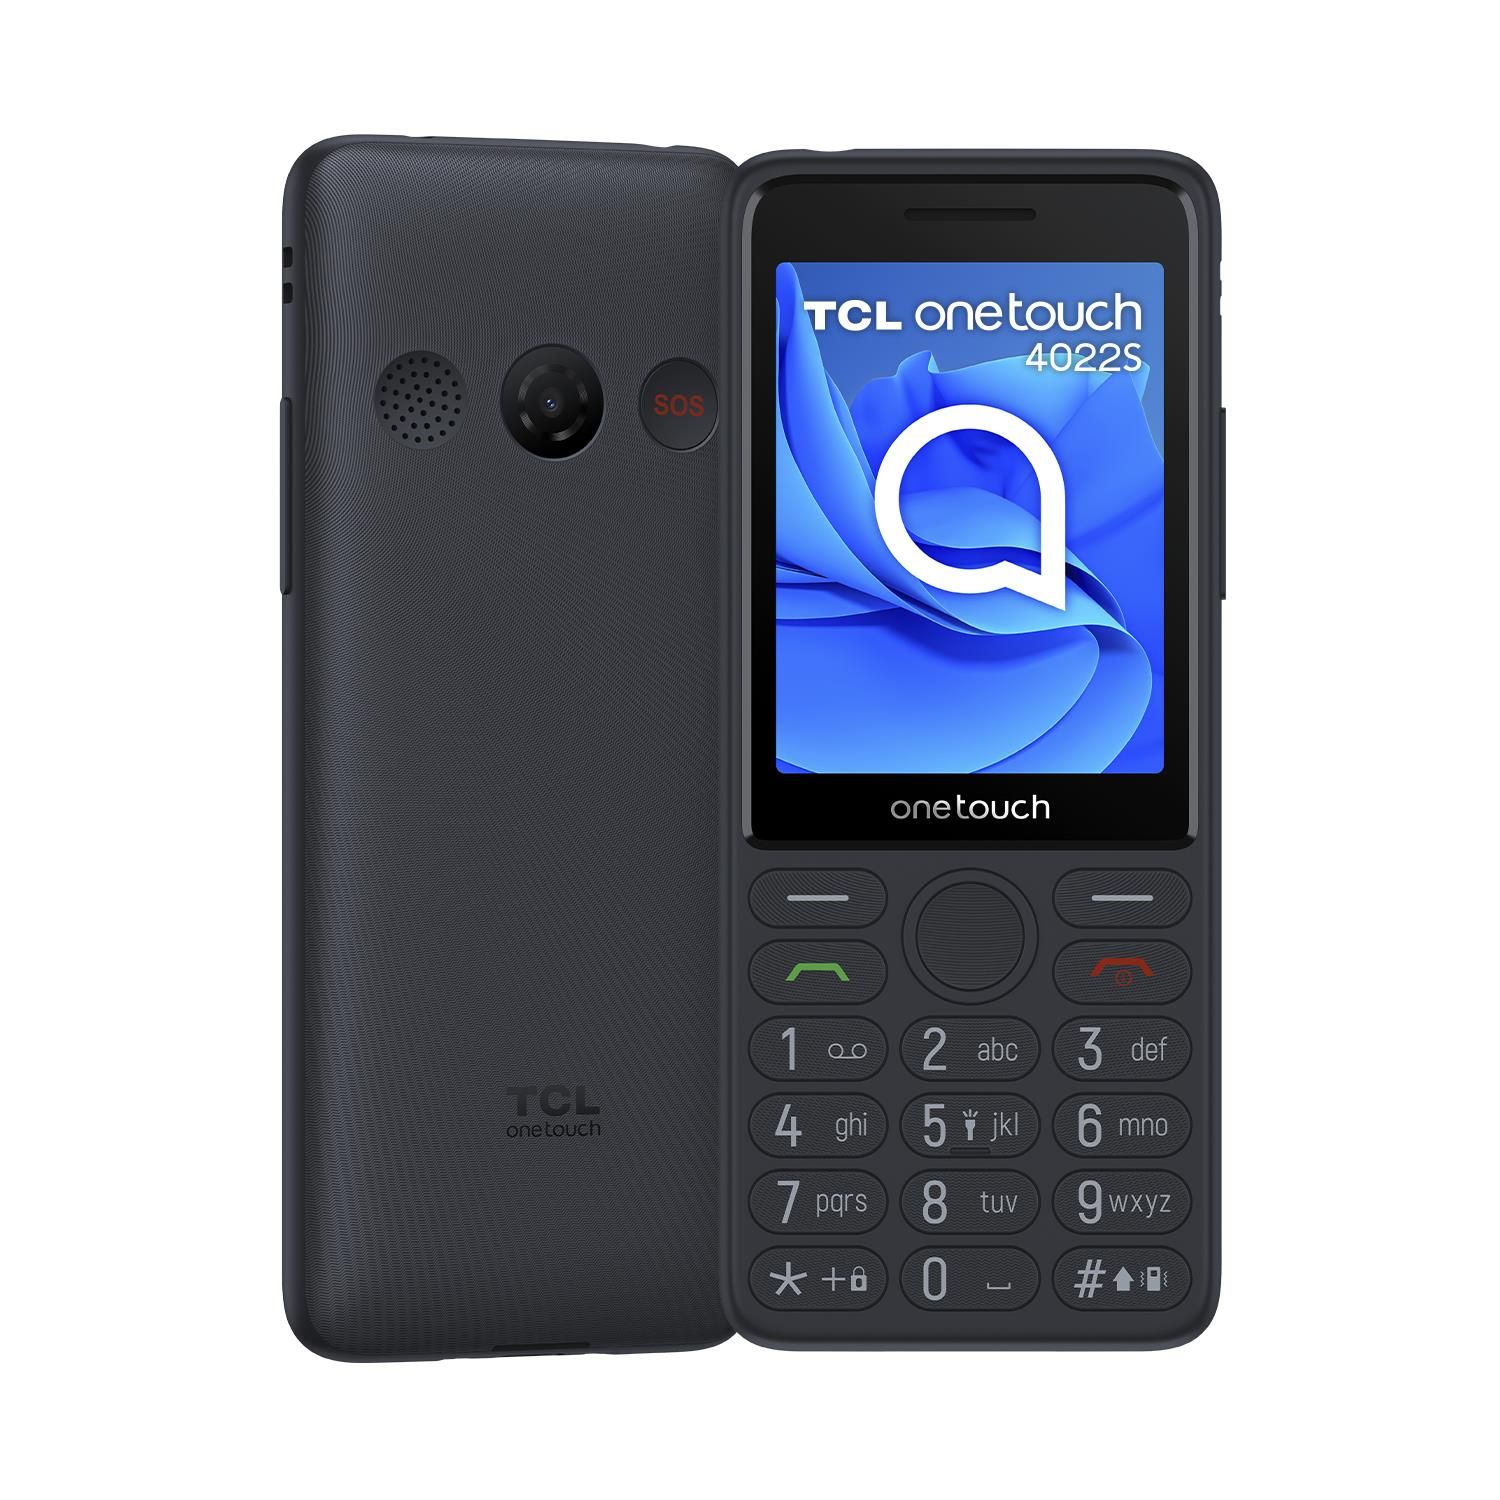 TCL Onetouch 4022s 2.8